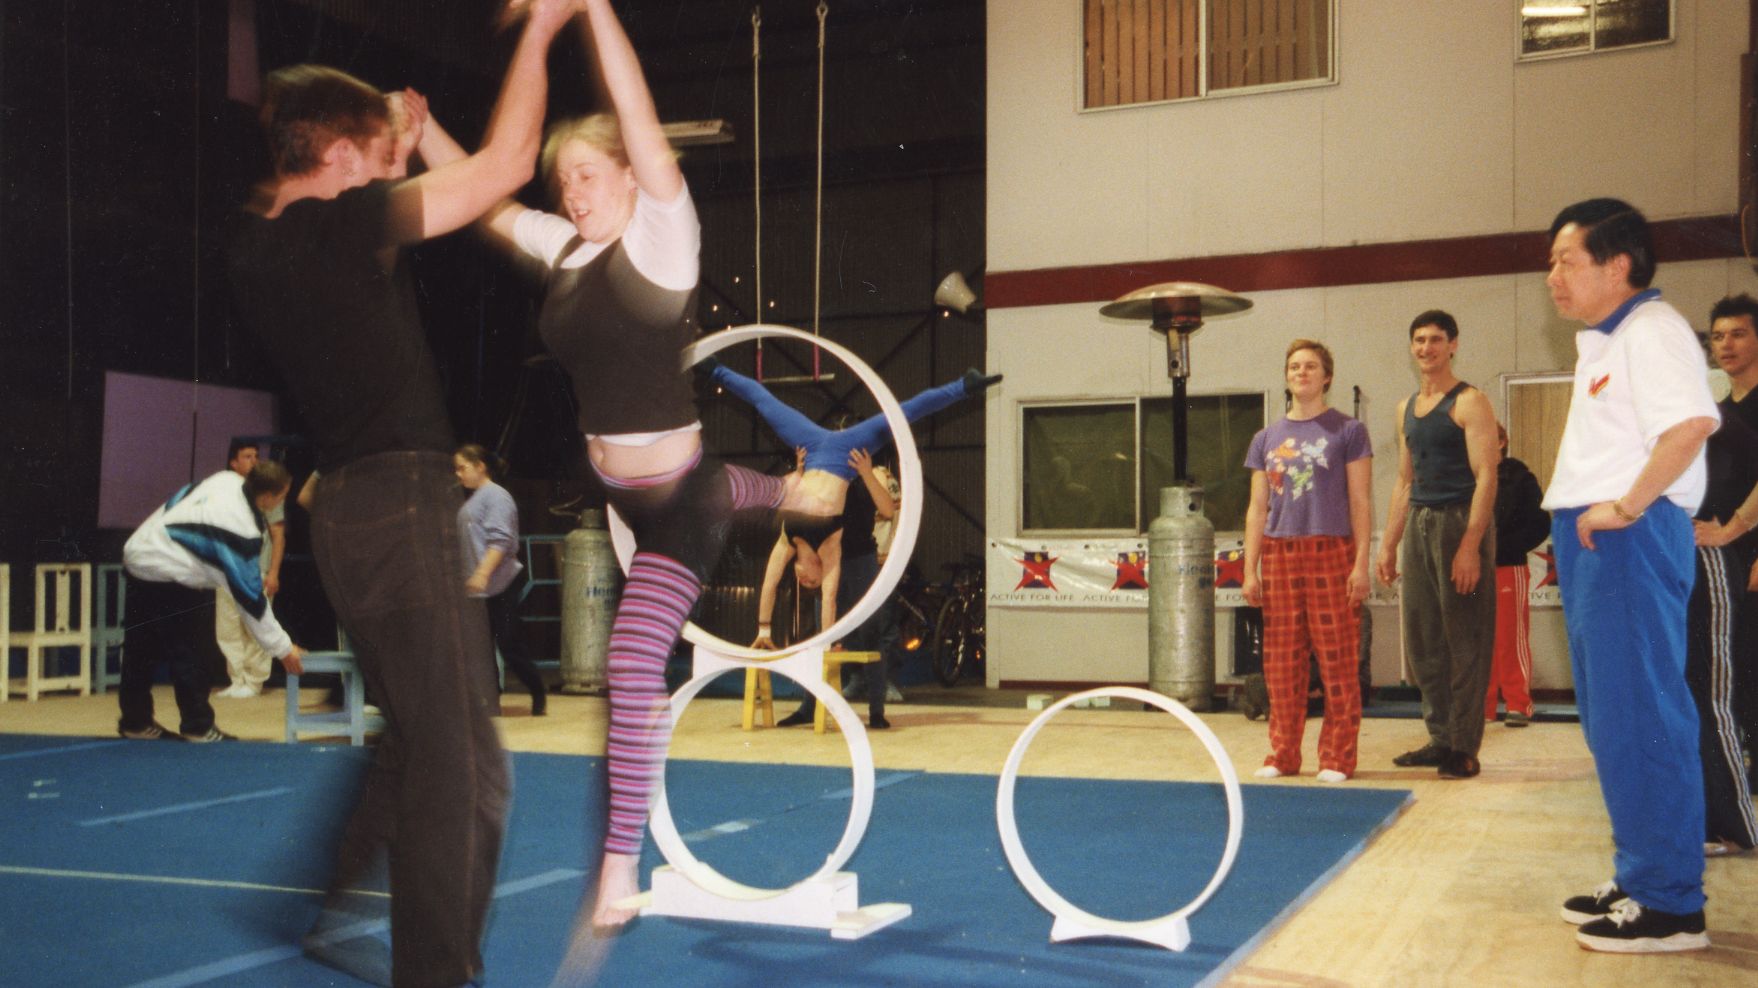 Circus performers practise in a warehouse